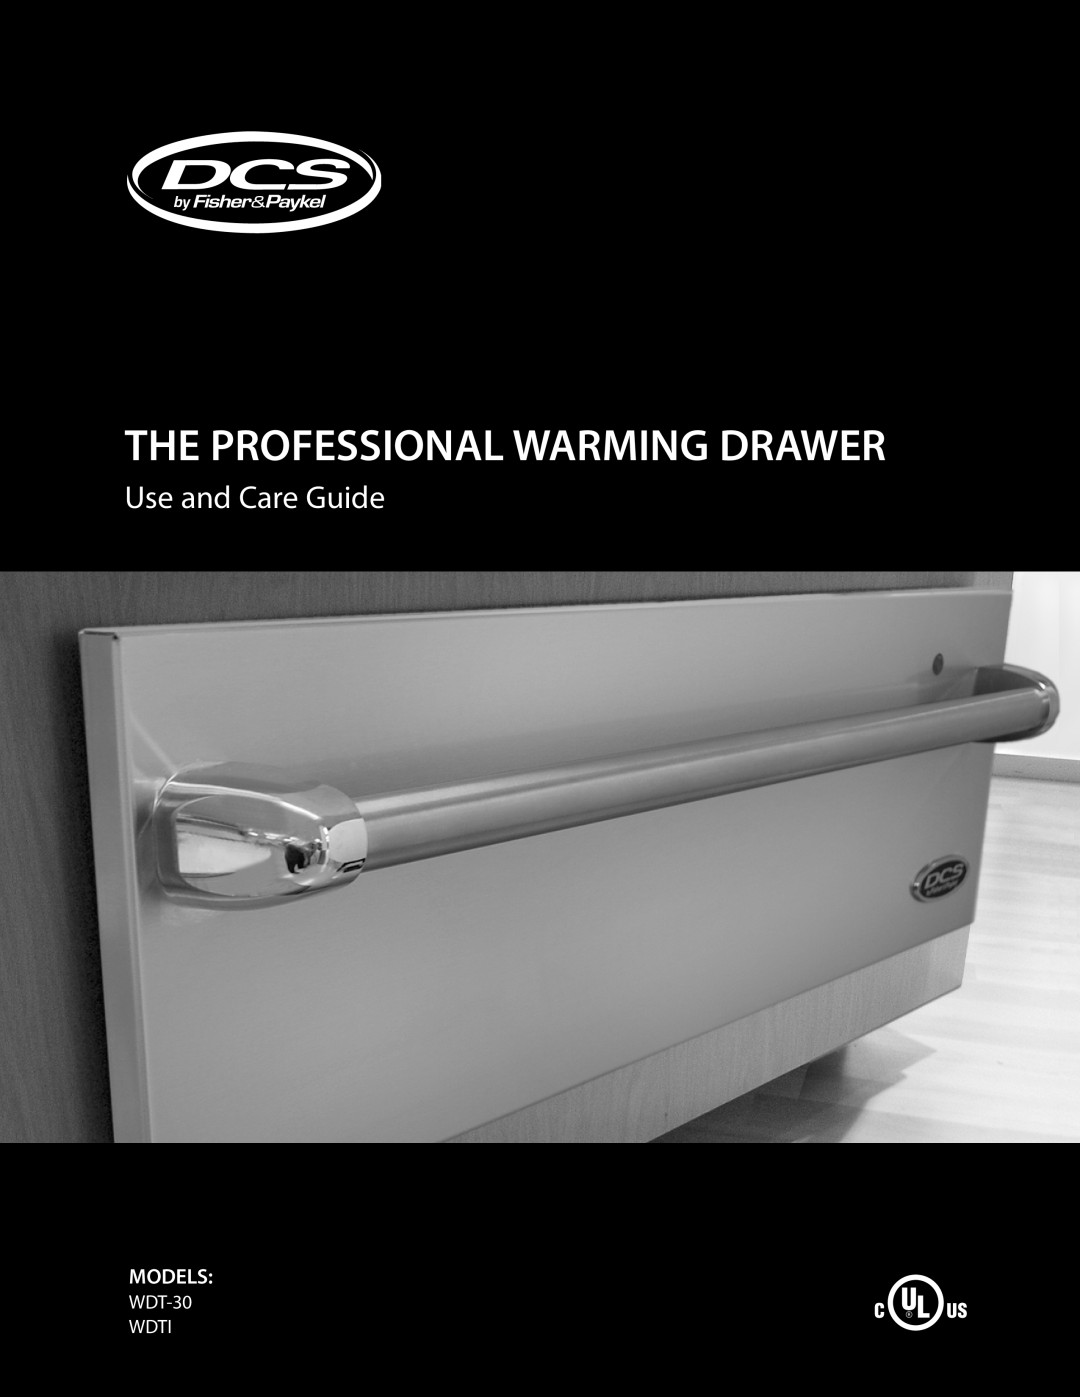 DCS manual The Professional Warming Drawer, Use and Care Guide, Models, WDT-30 WDTI 